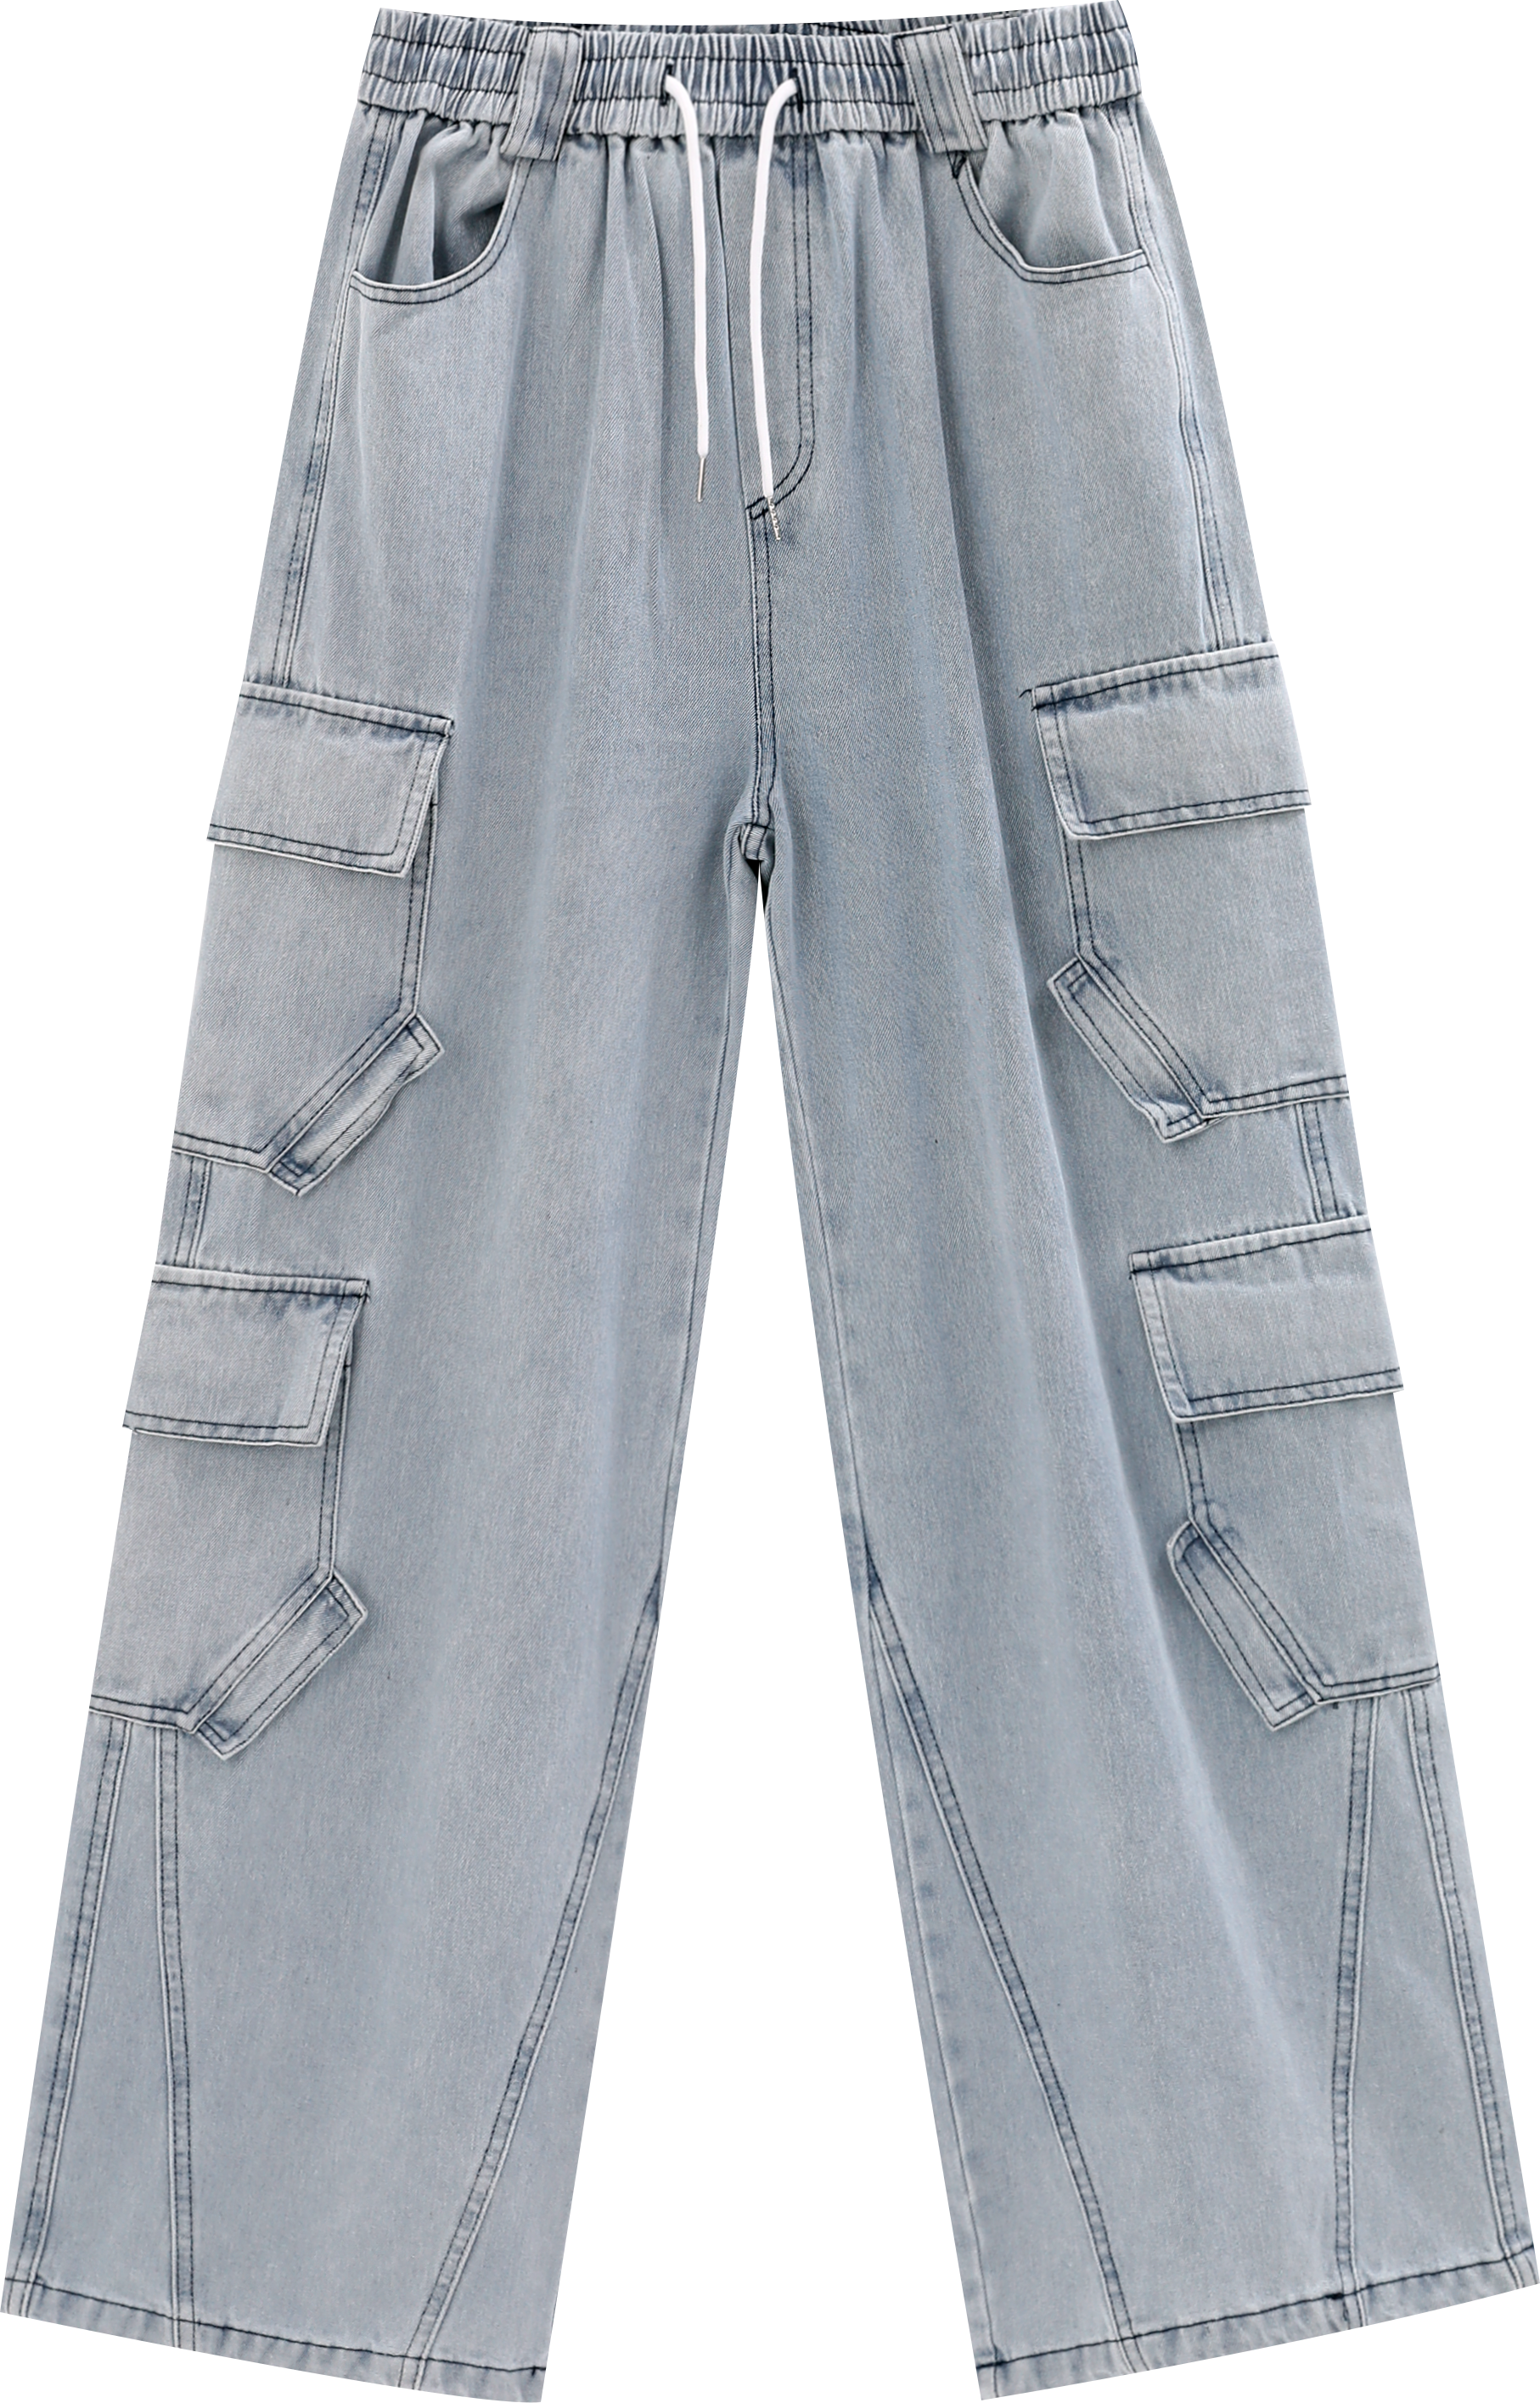 Faire Echo Loose fitting straight leg jeans